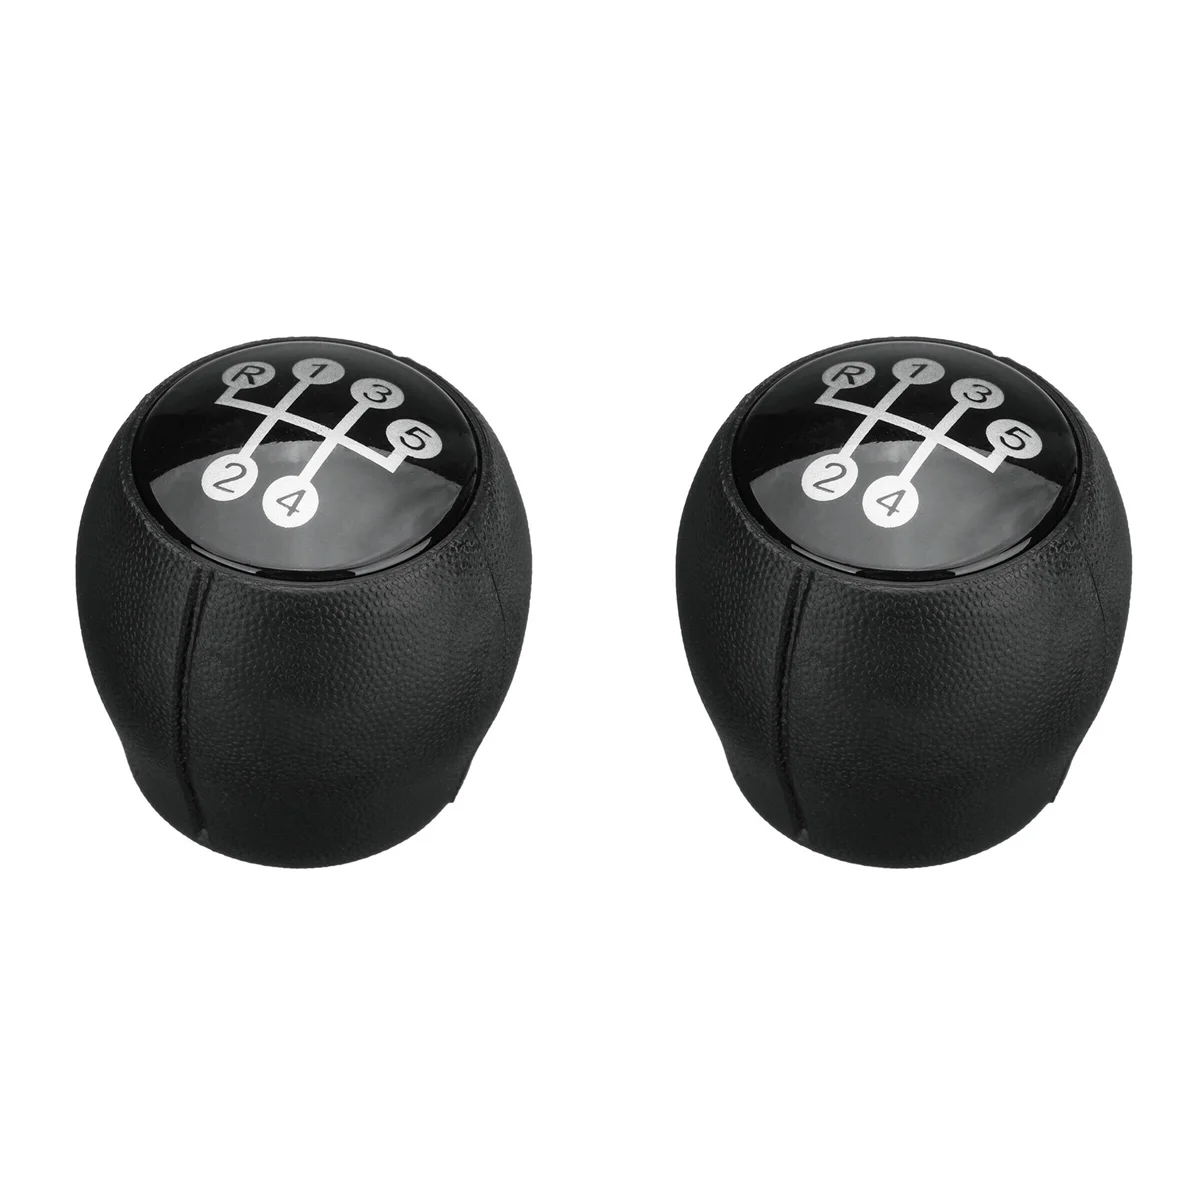 

2X 5 Speed Manual Car Gear Shift Knob Shifter Lever for Opel Vauxhall Corsa B C Vectra